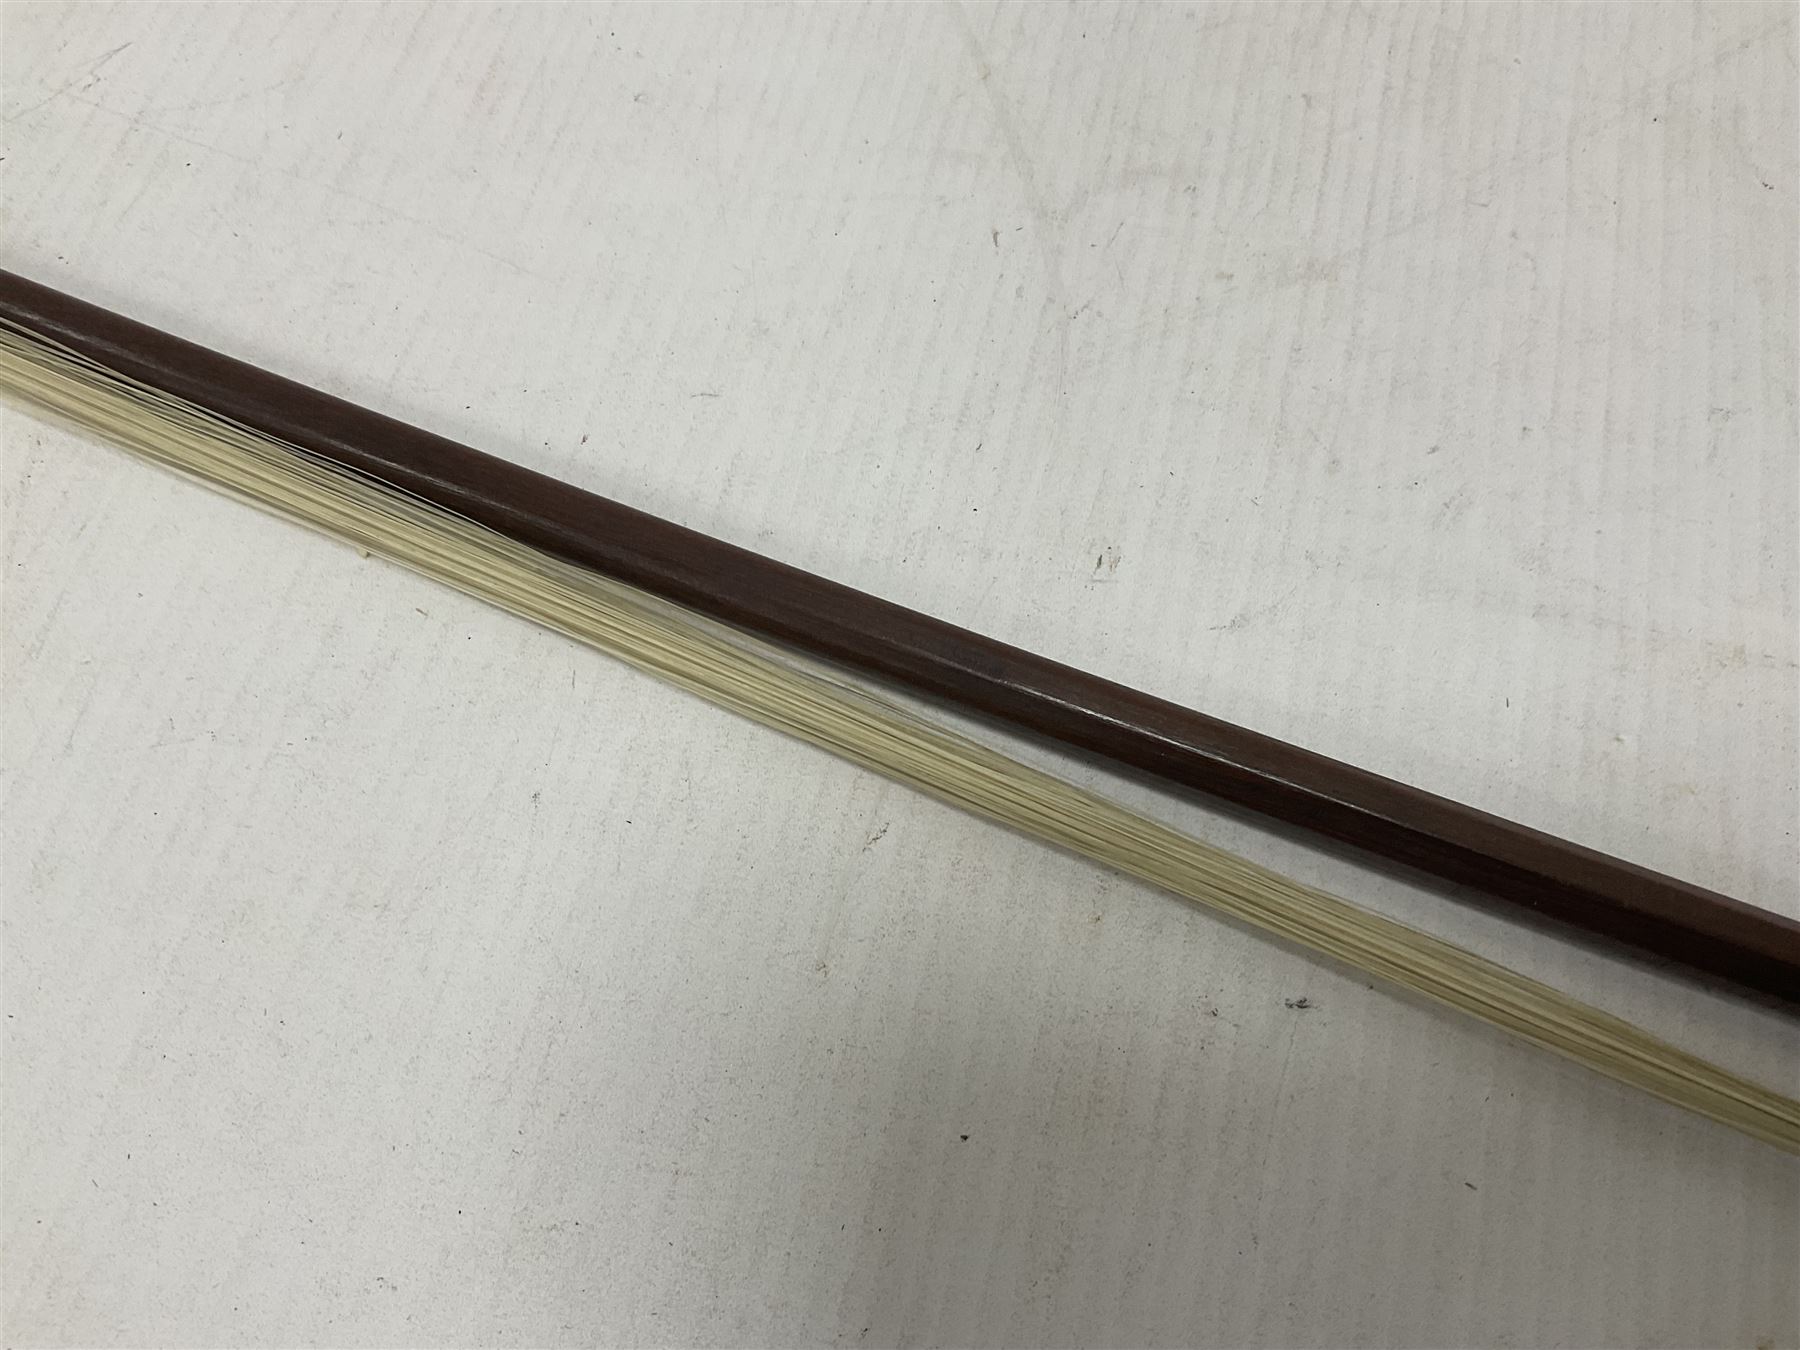 Wooden violin bow - Image 5 of 9